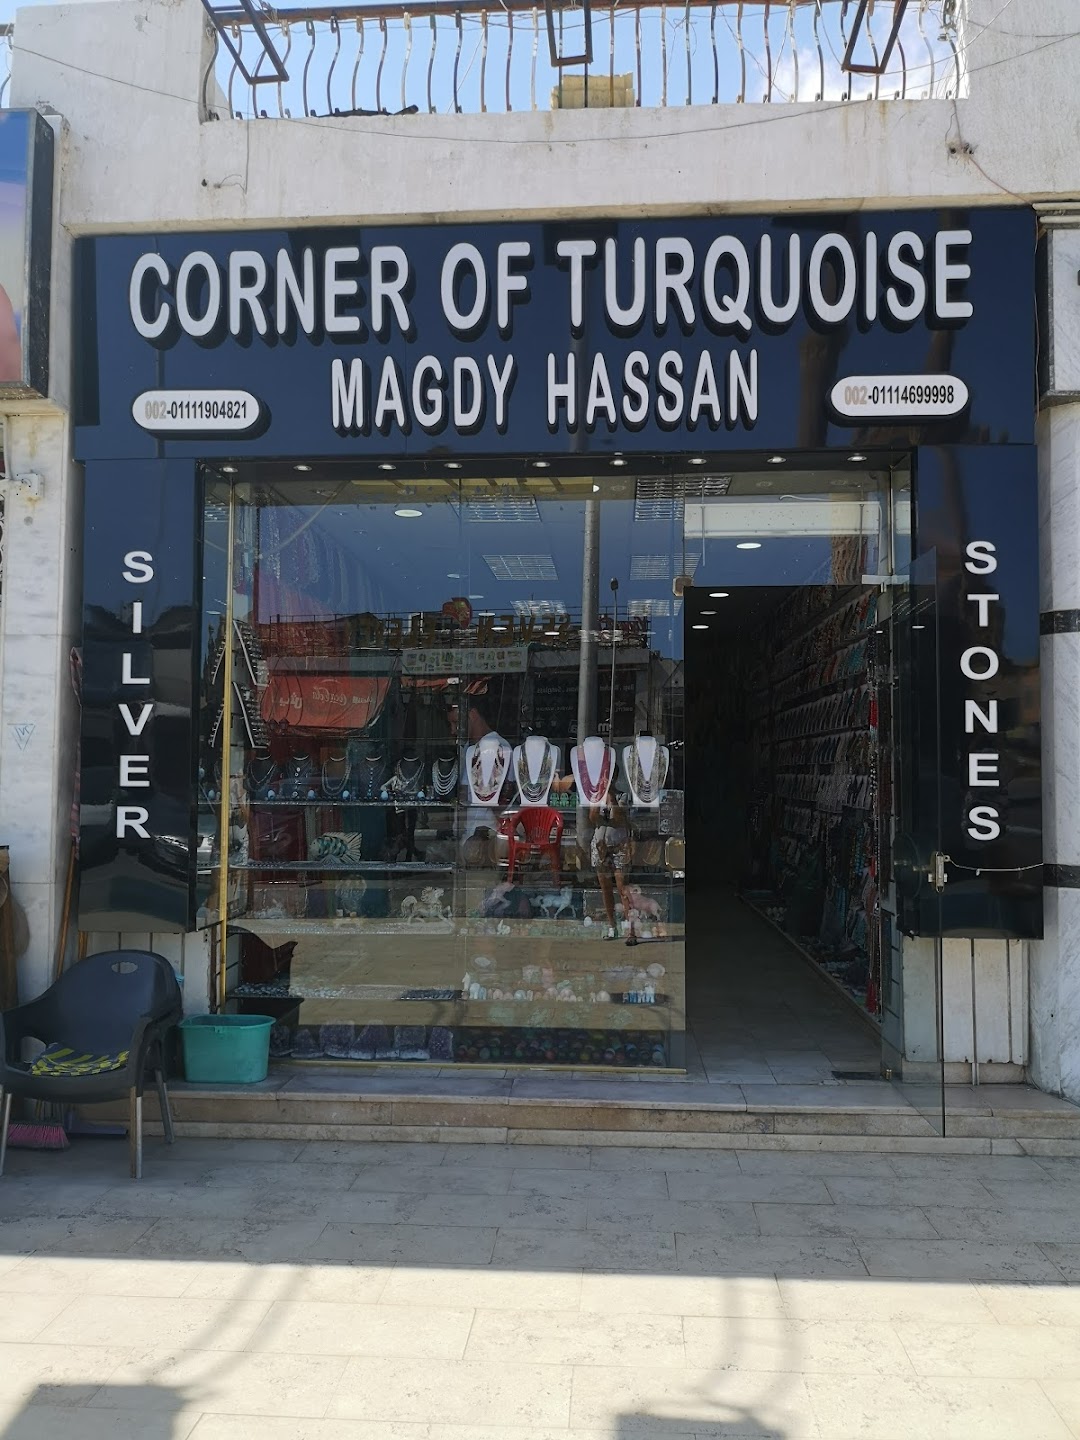 Corner of Turquoise Magdy Hassan